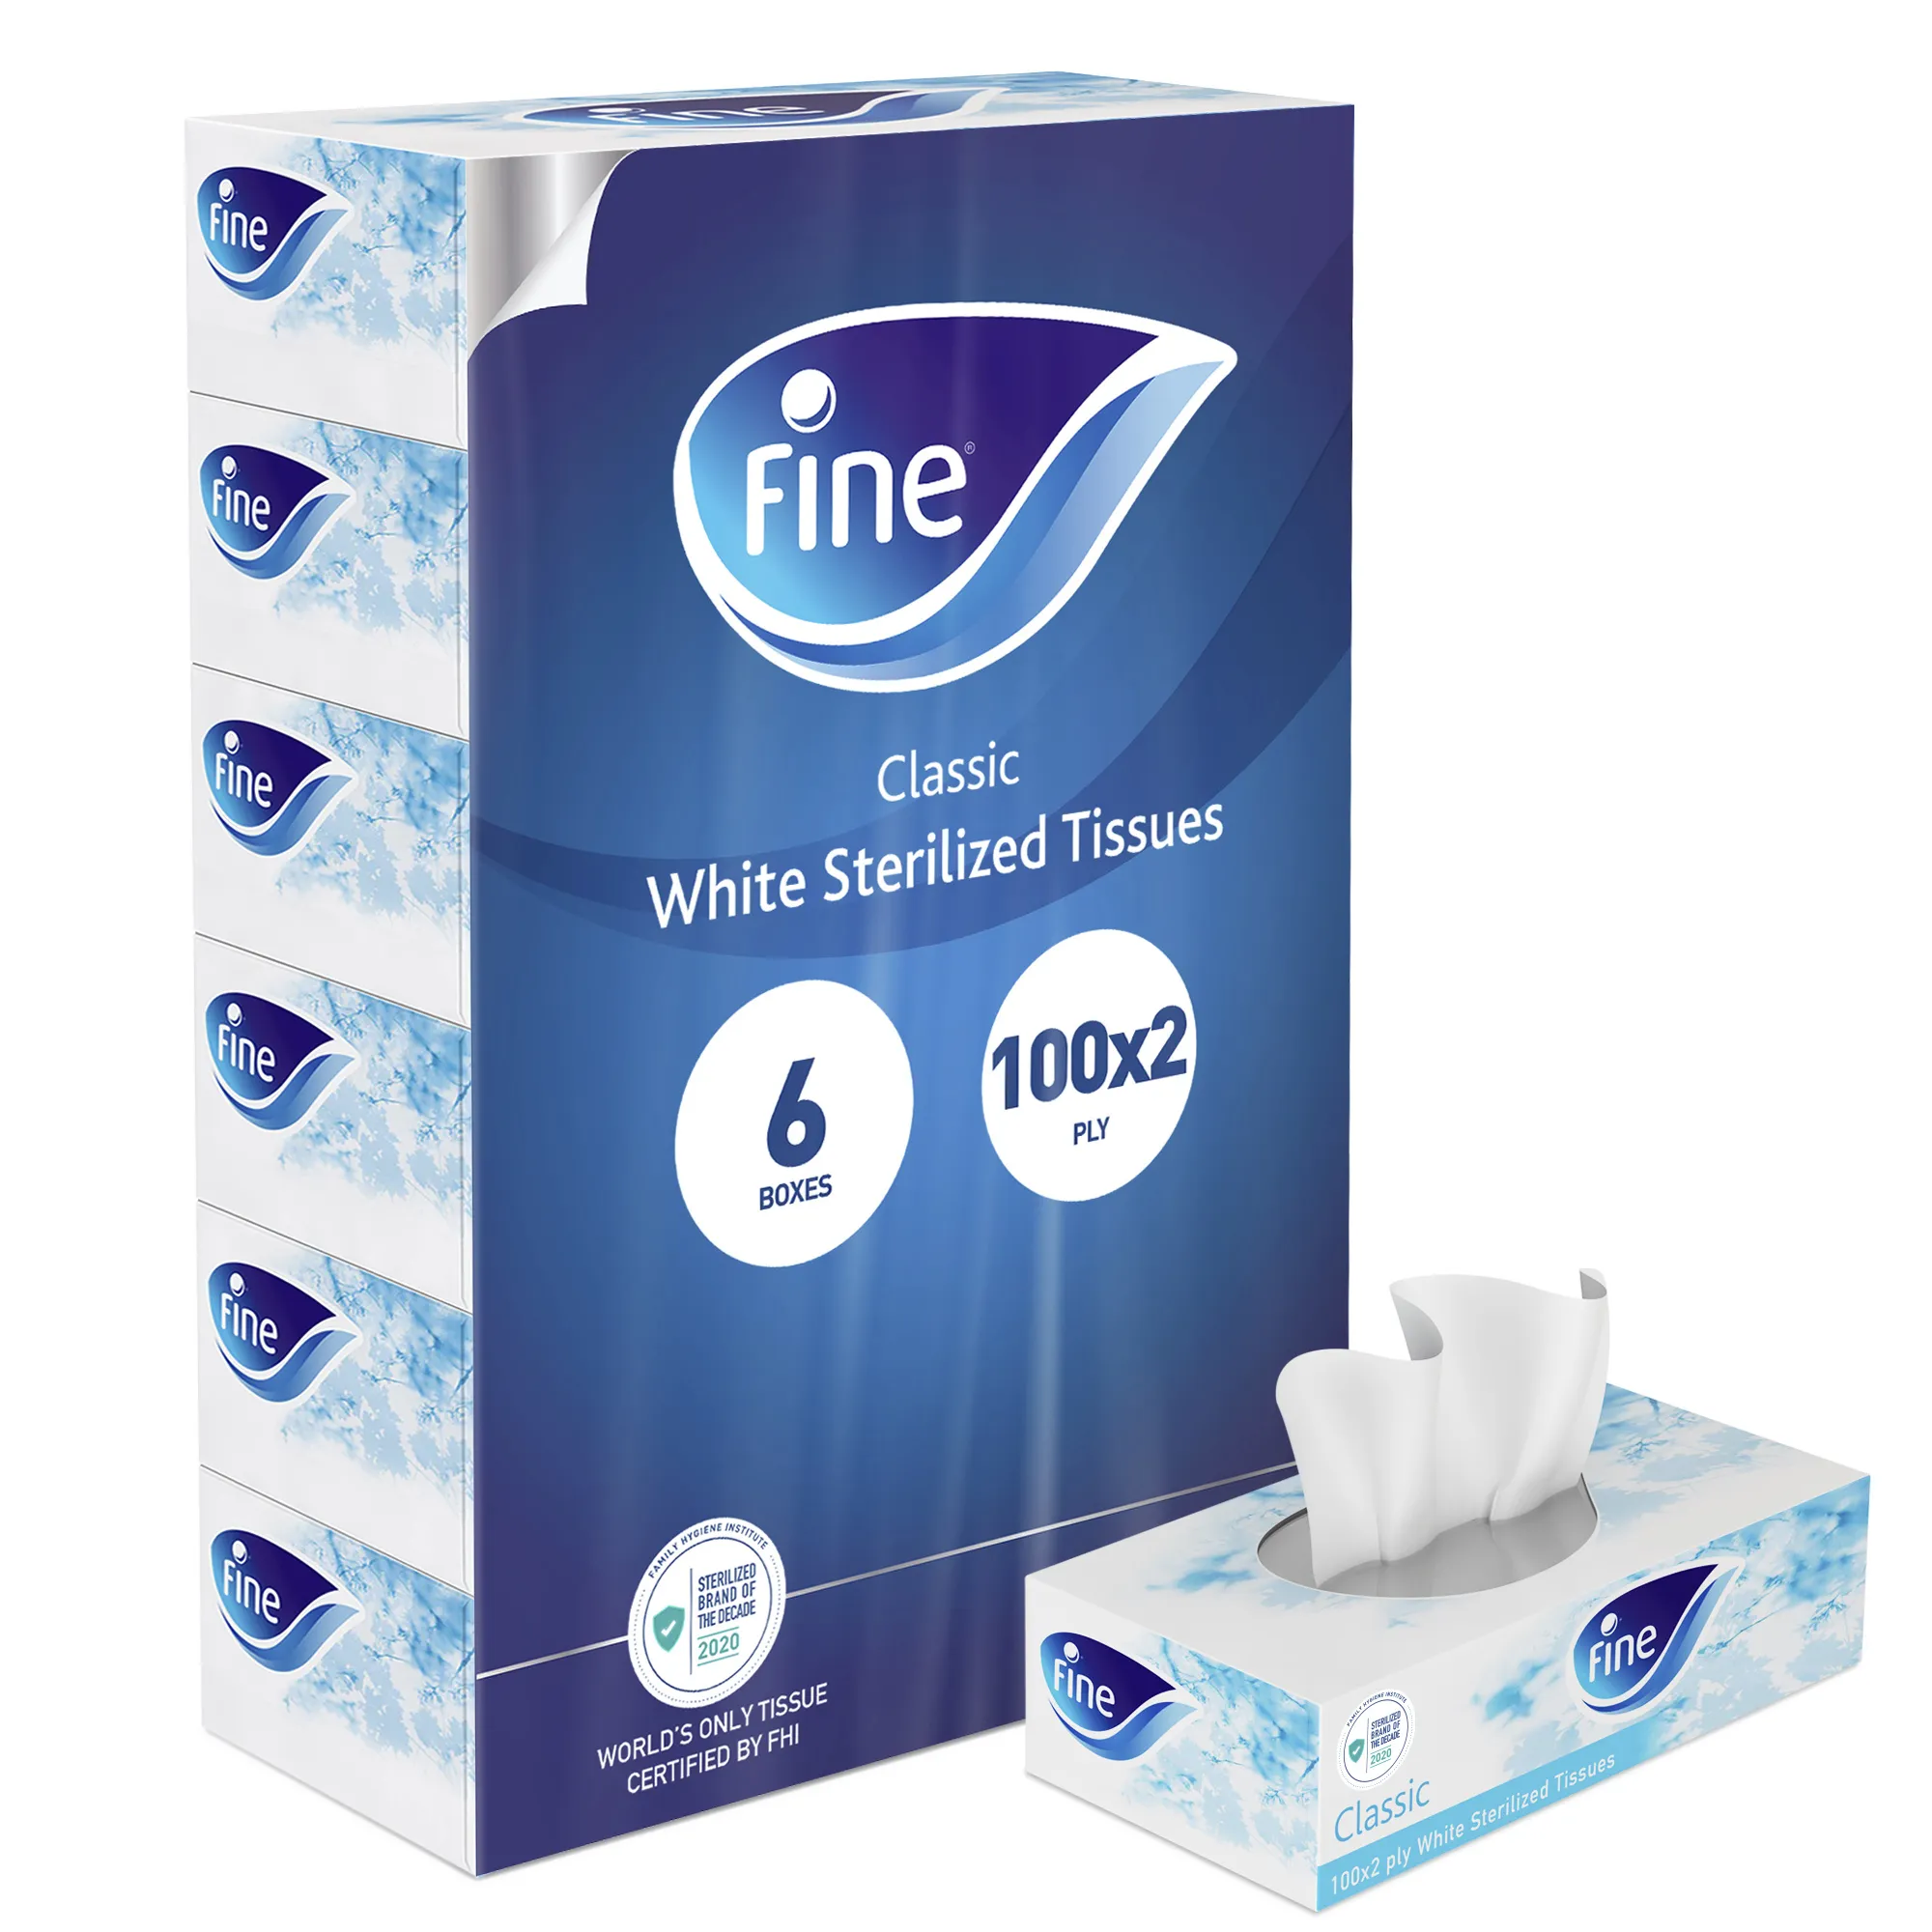 Fine, Facial Tissues, Classic, 100x2 Ply White Tissues, pack of 6 boxes, 600 tissues